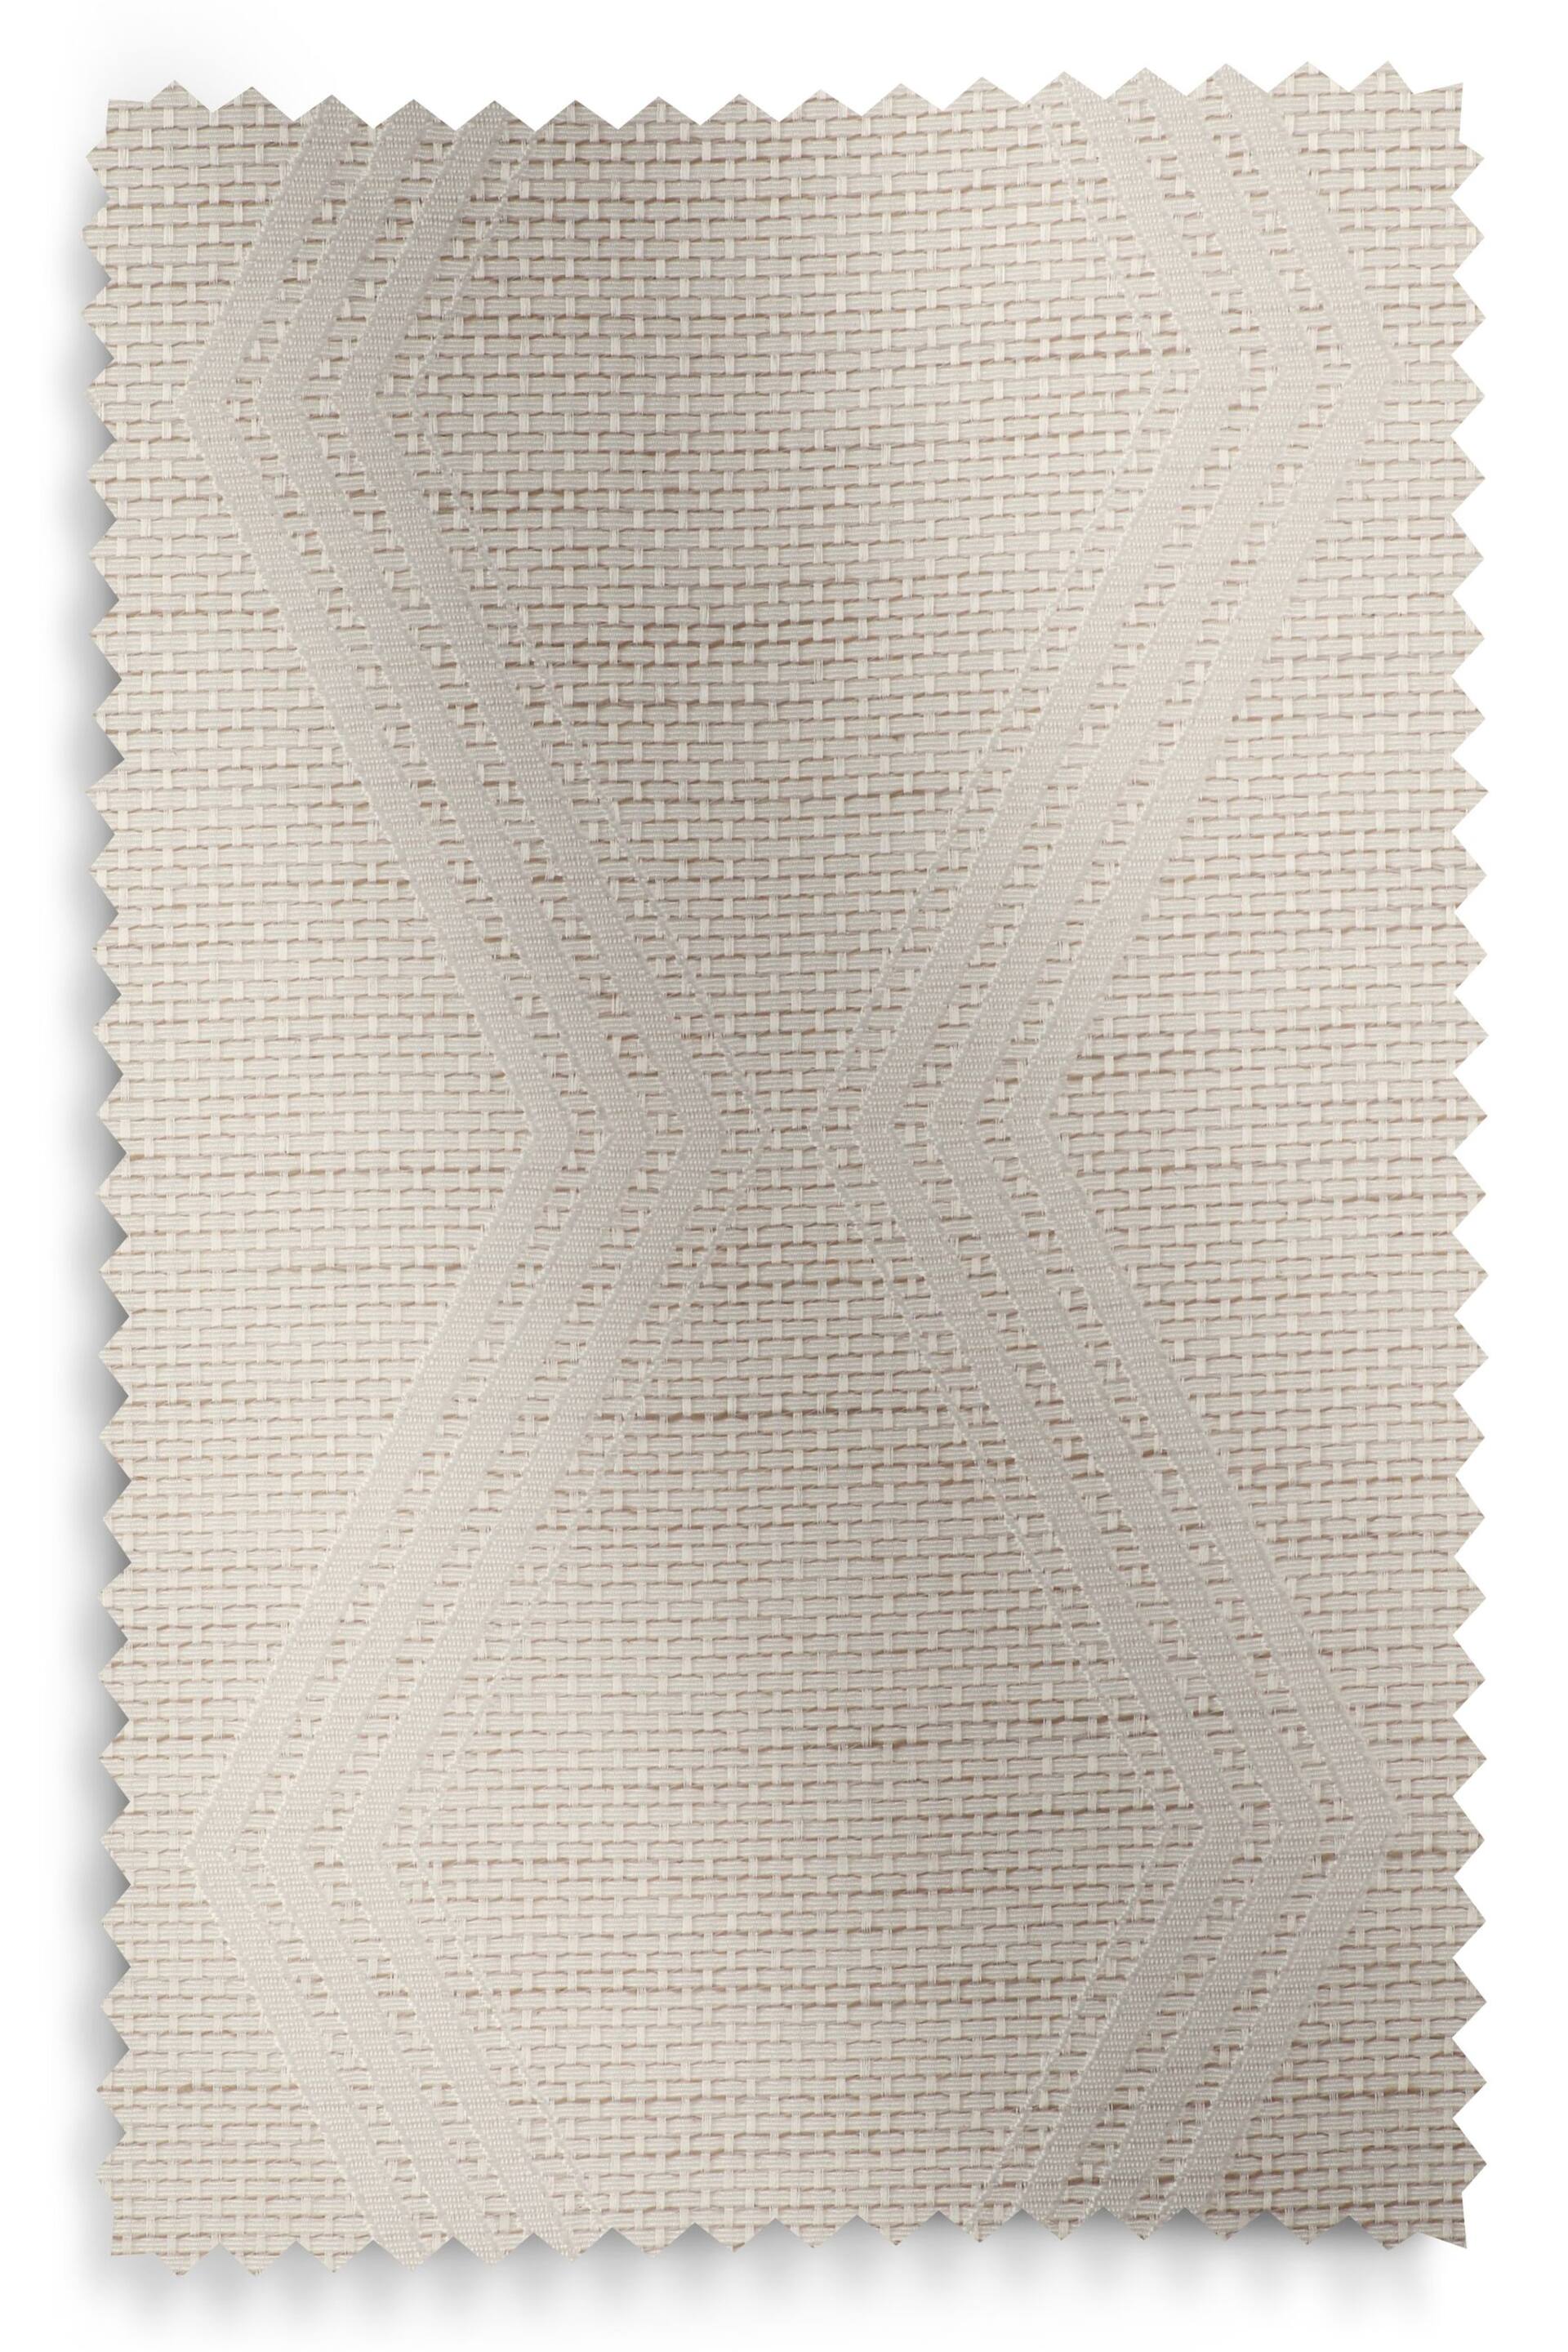 Natural Next Textured Jacquard Eyelet Lined Curtains - Image 6 of 6